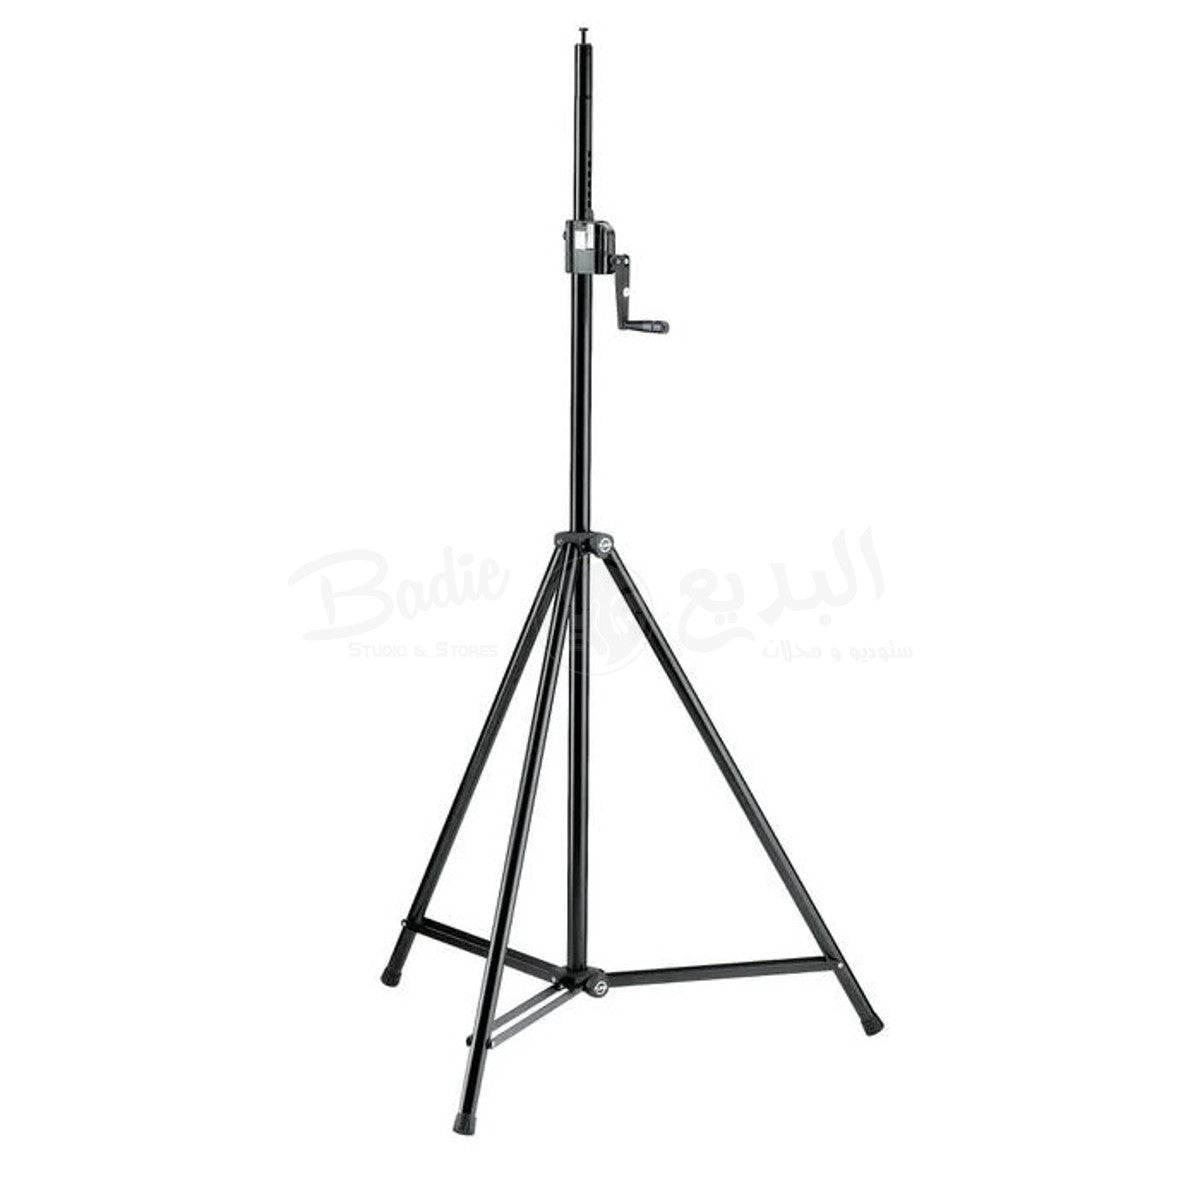 Konig & Meyer 24610-009-55 High Quality Lighting Stand | Professional Audio Accessories | Musical Instruments. Musical Instruments: Accessories By Categories, Musical Instruments. Musical Instruments: Stand By Categories, Professional Audio Accessories, Professional Audio Accessories. Professional Audio Accessories: Speaker Stand, Professional Audio Accessories. Professional Audio Accessories: Stand By Categories, Professional Audio Accessories. Professional Audio Accessories: Wall Mount Speaker Bracket | K